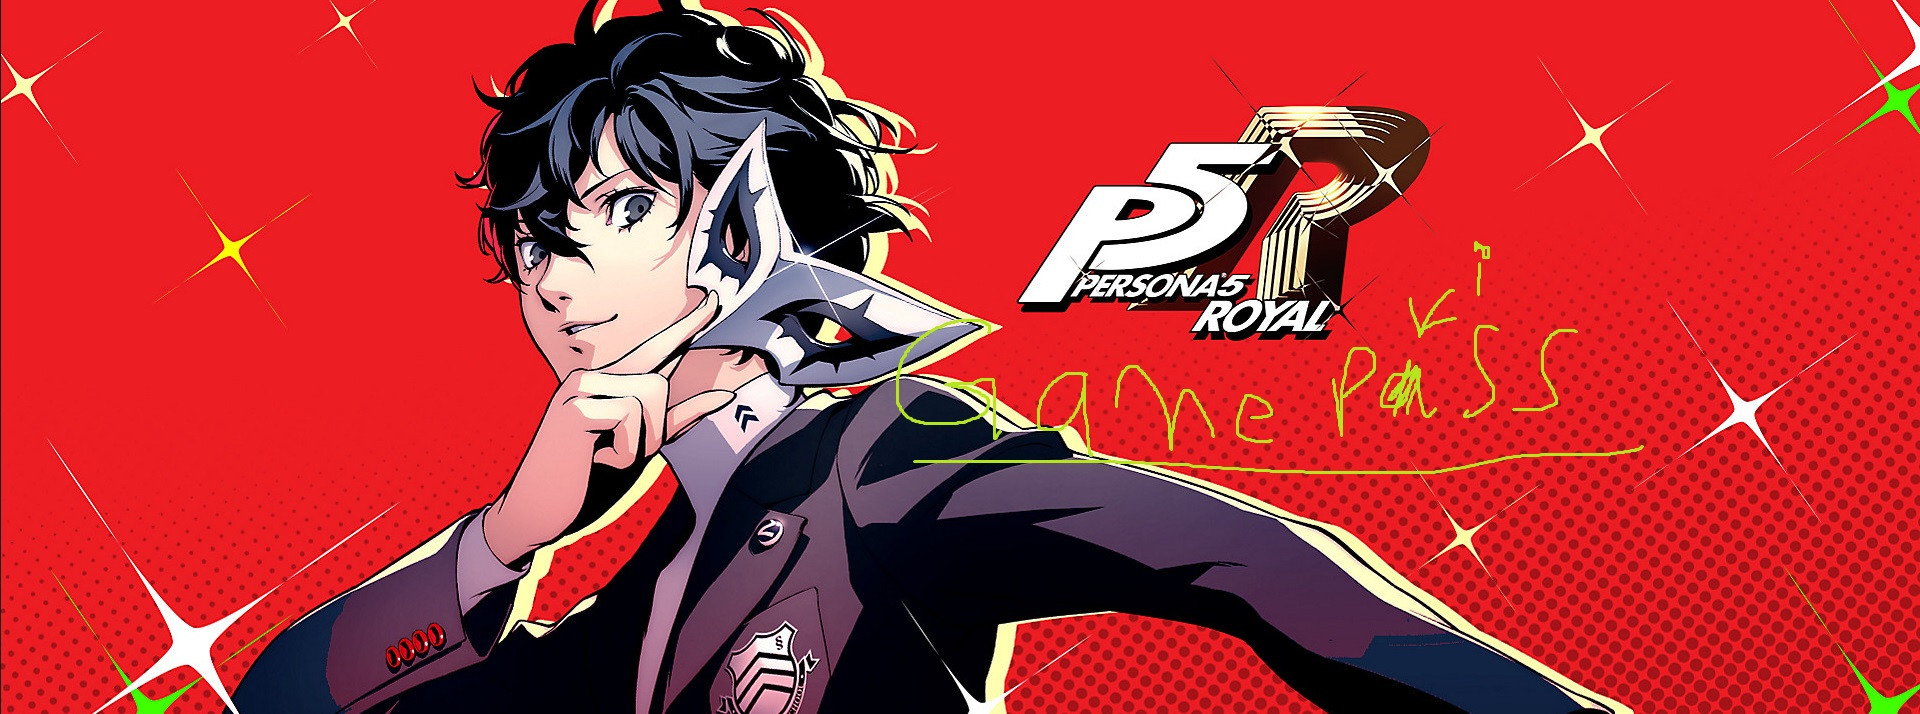 How To Install Save Files (Game Pass Ver.) [Persona 5 Royal (PC ...